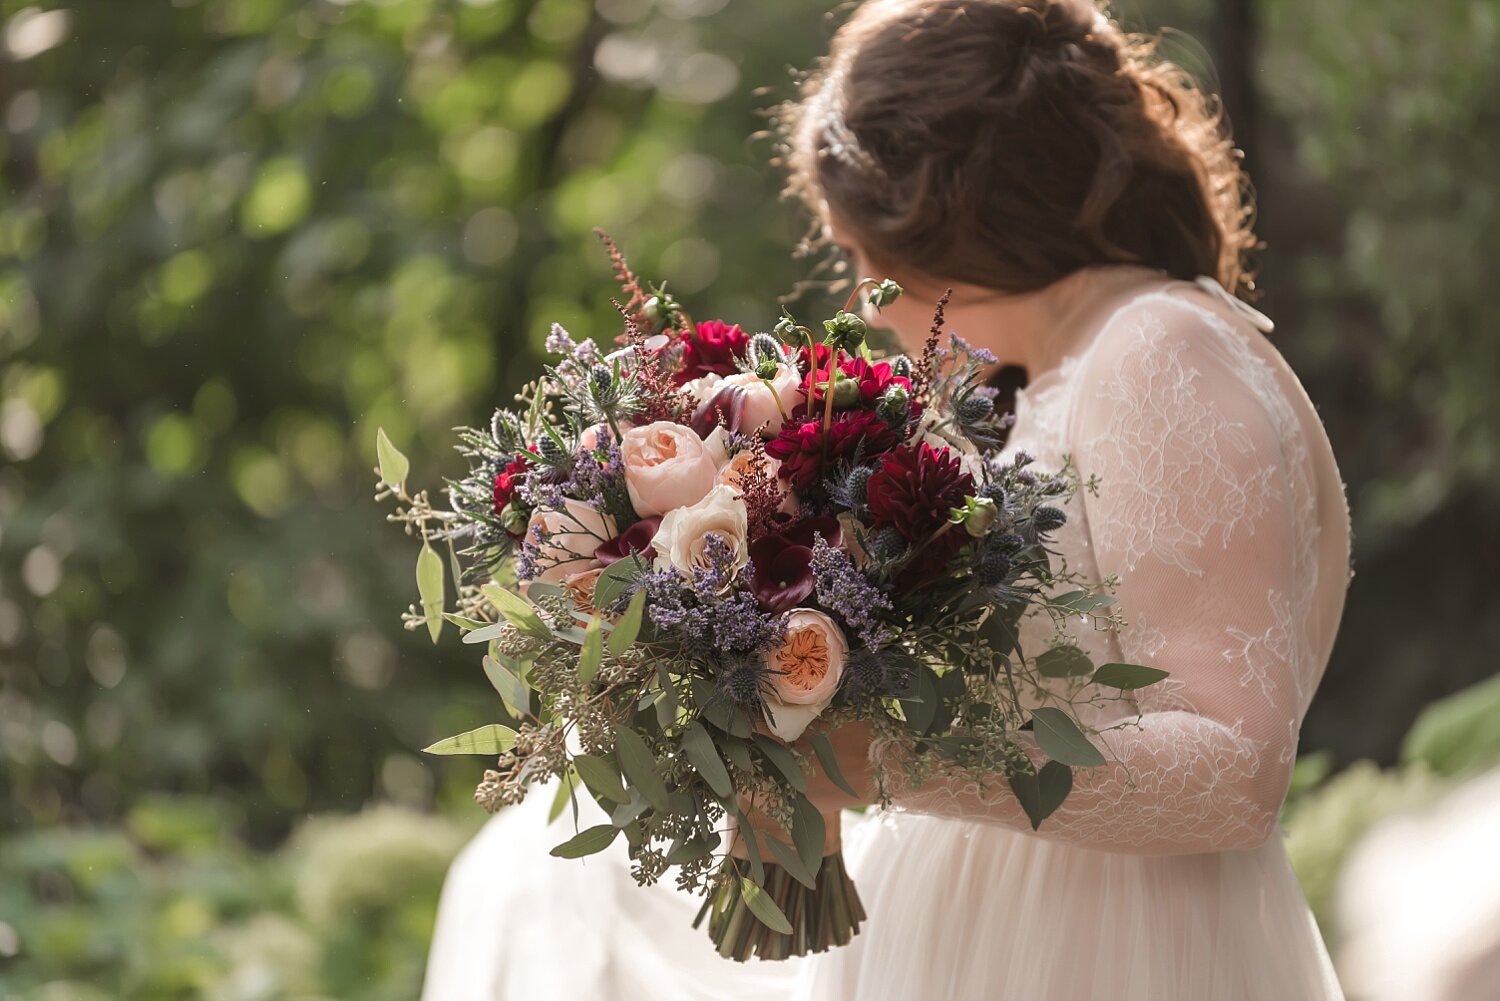  A blush and dark red bouquet being held by a Detroit bride.  